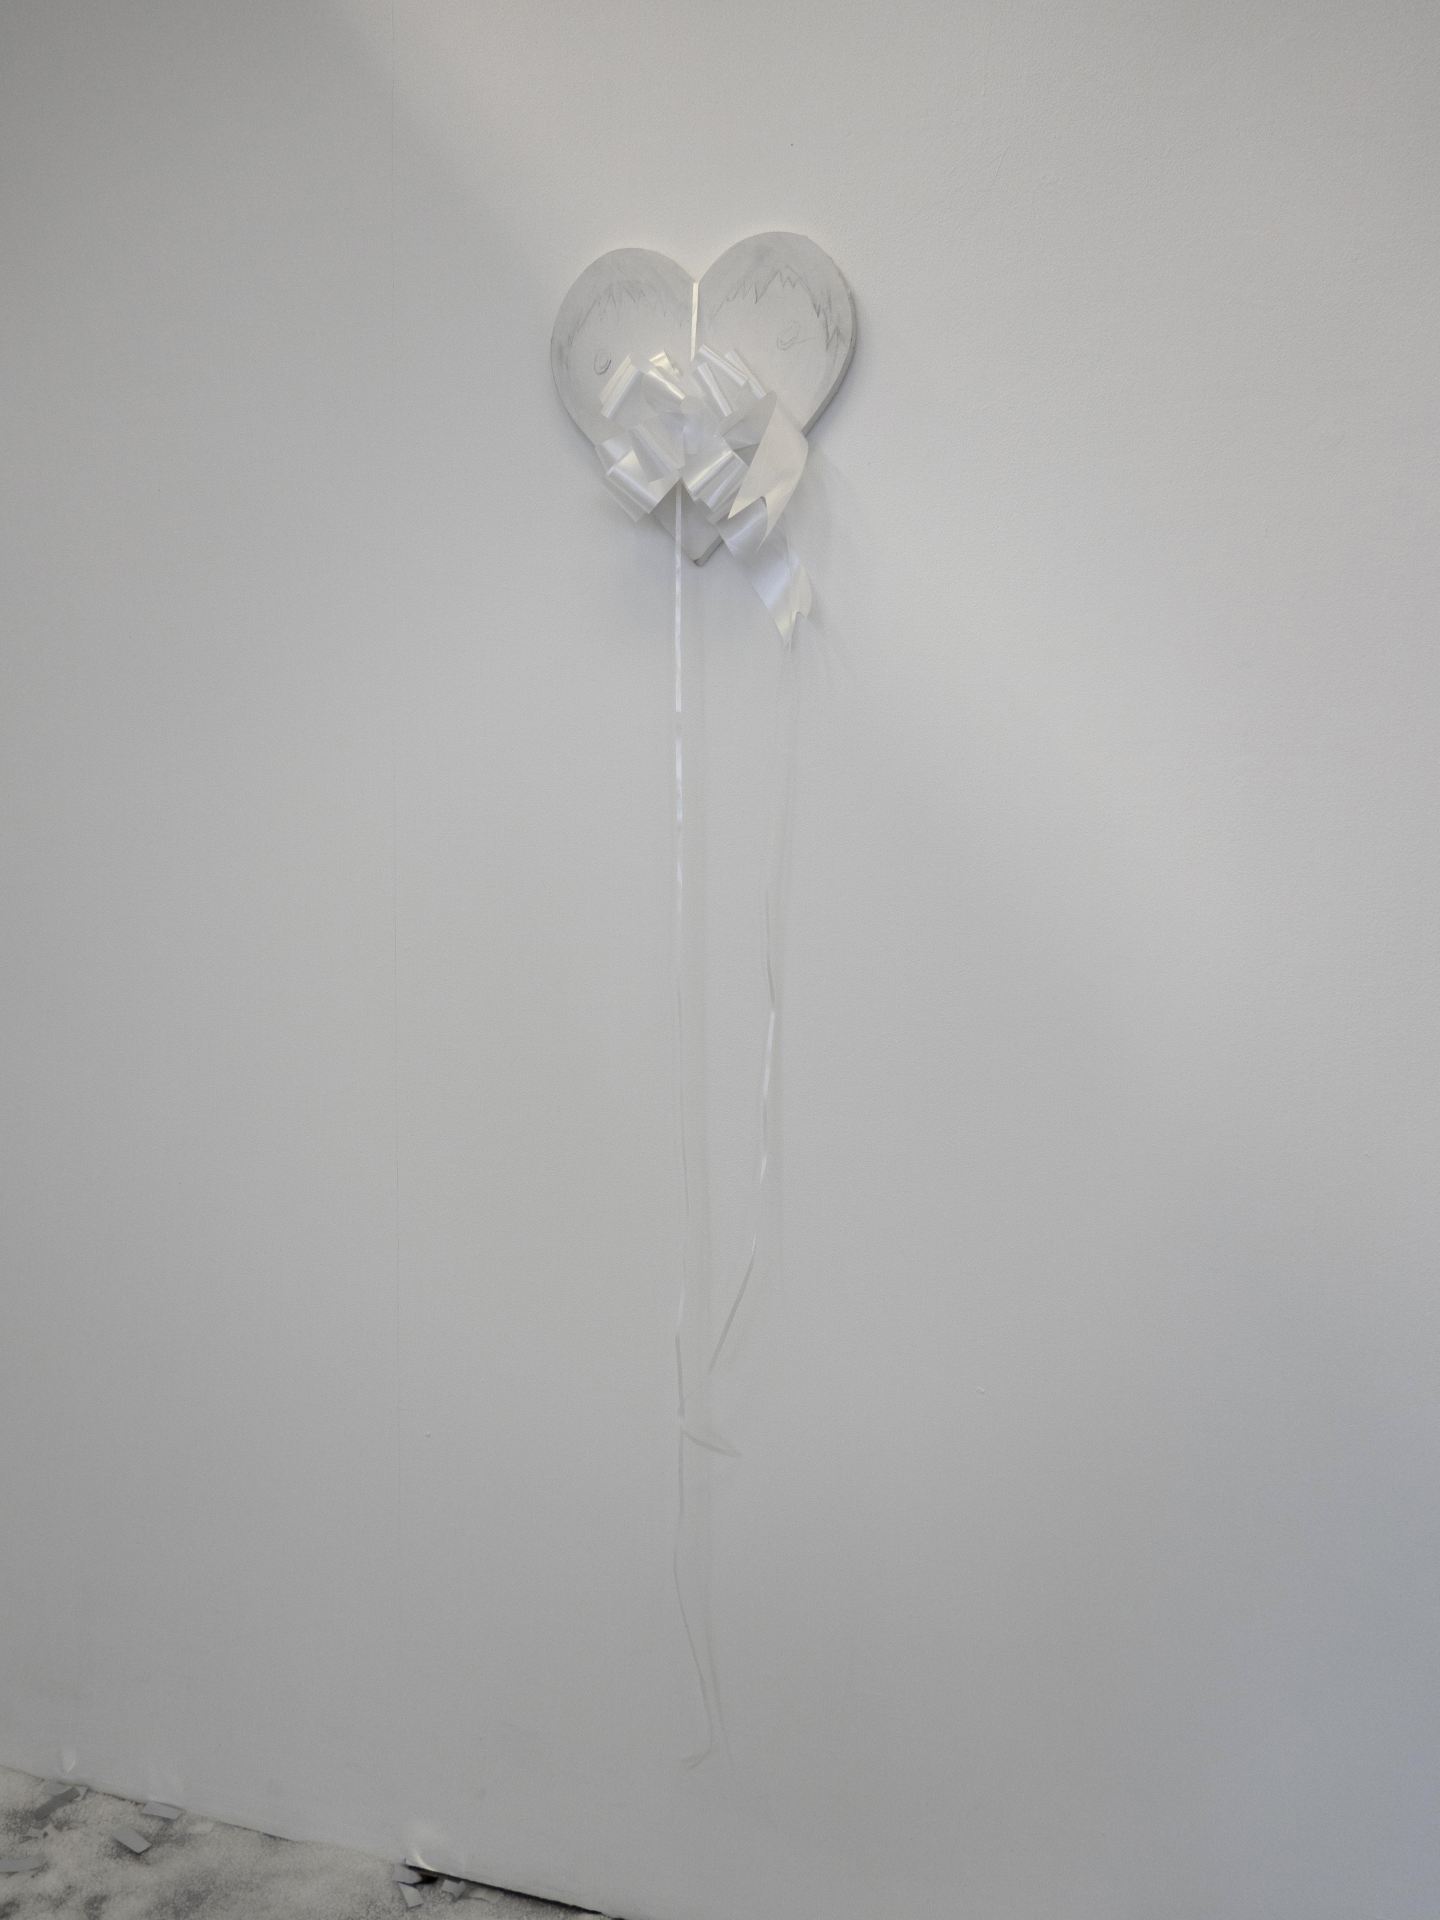 An image of a white object hung on a white wall.